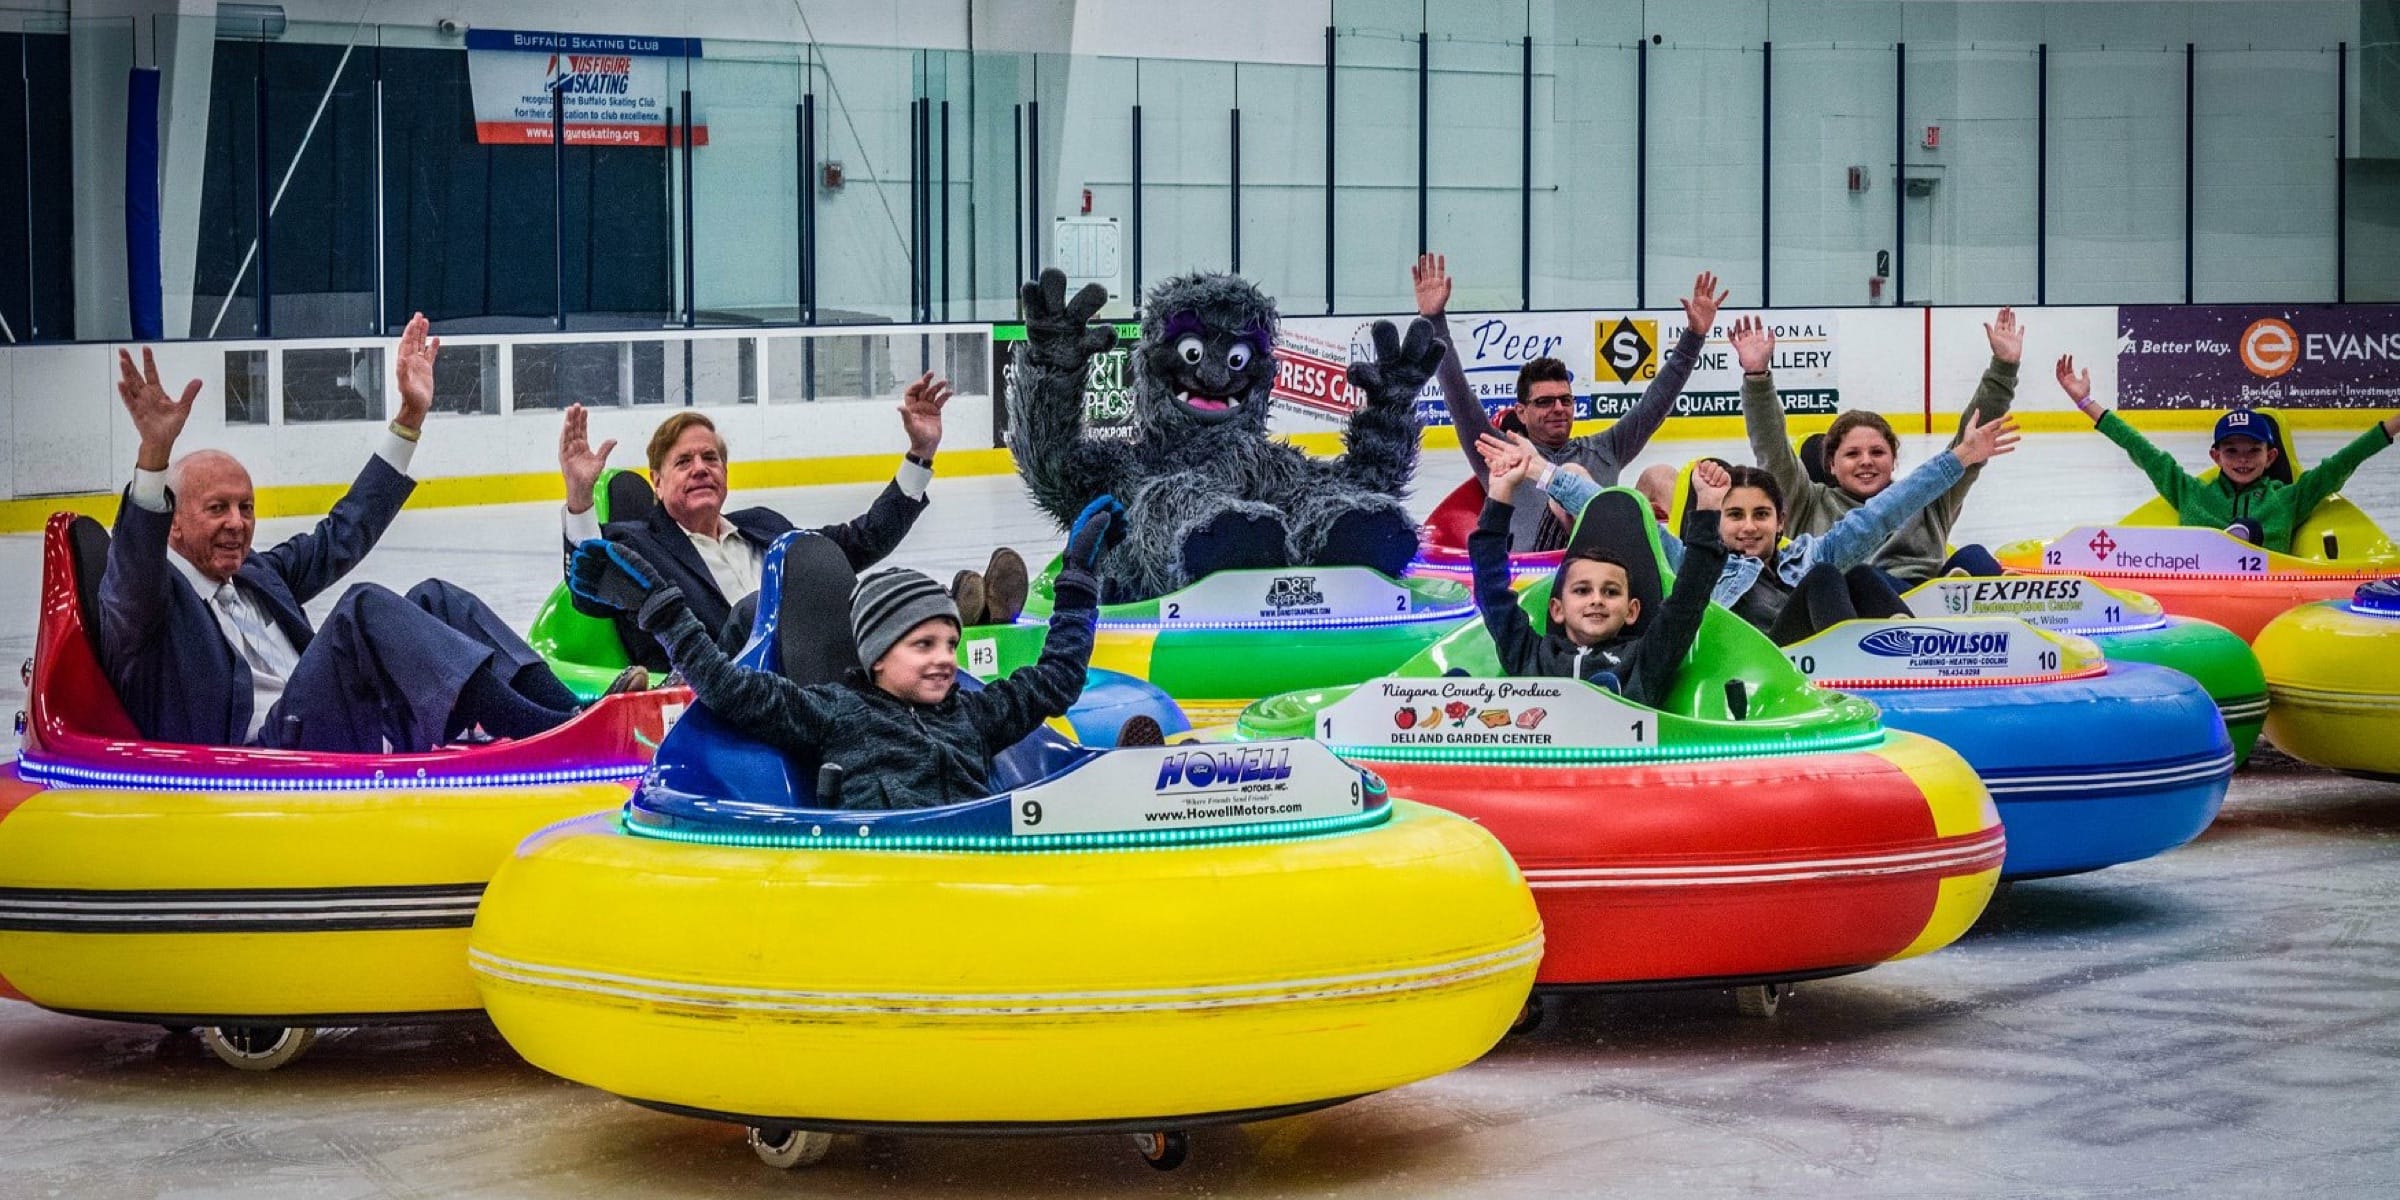 Cornerstone Ice Arena mascot sitting in an ice bumper car on the ice with other people in ice bumper cars